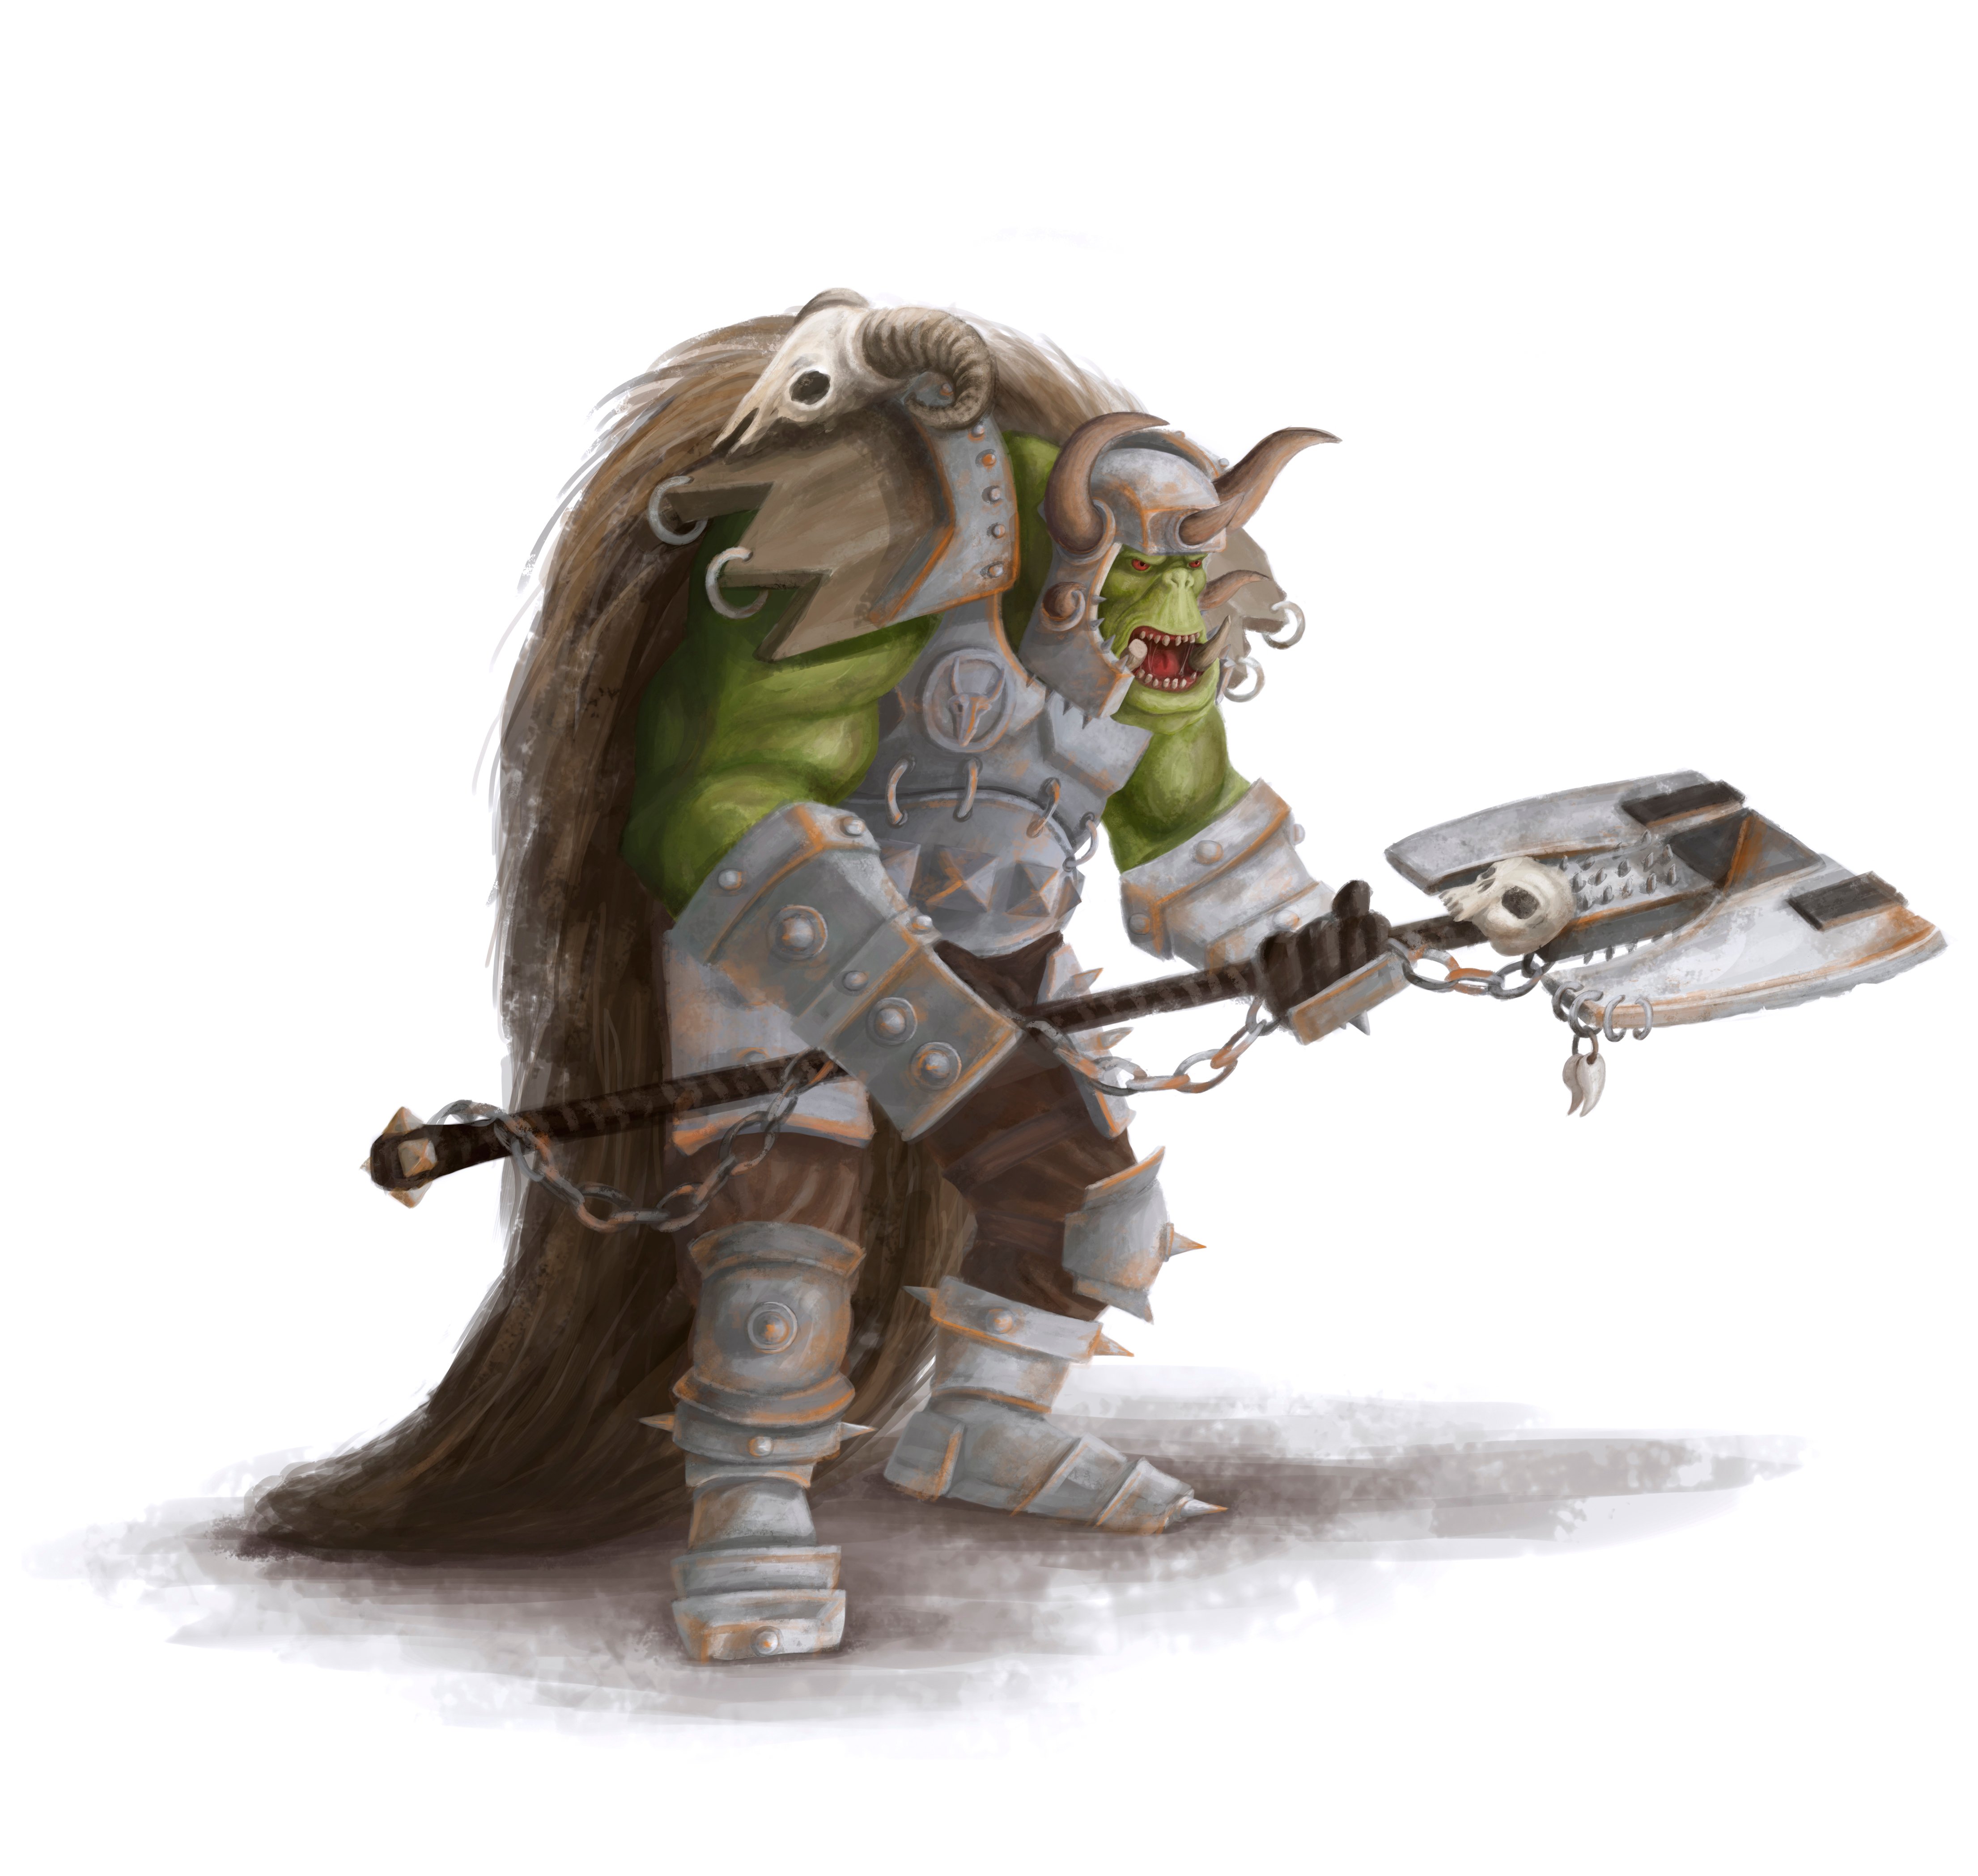 The Art of Mounted Heroes (II): The Orc Warrior